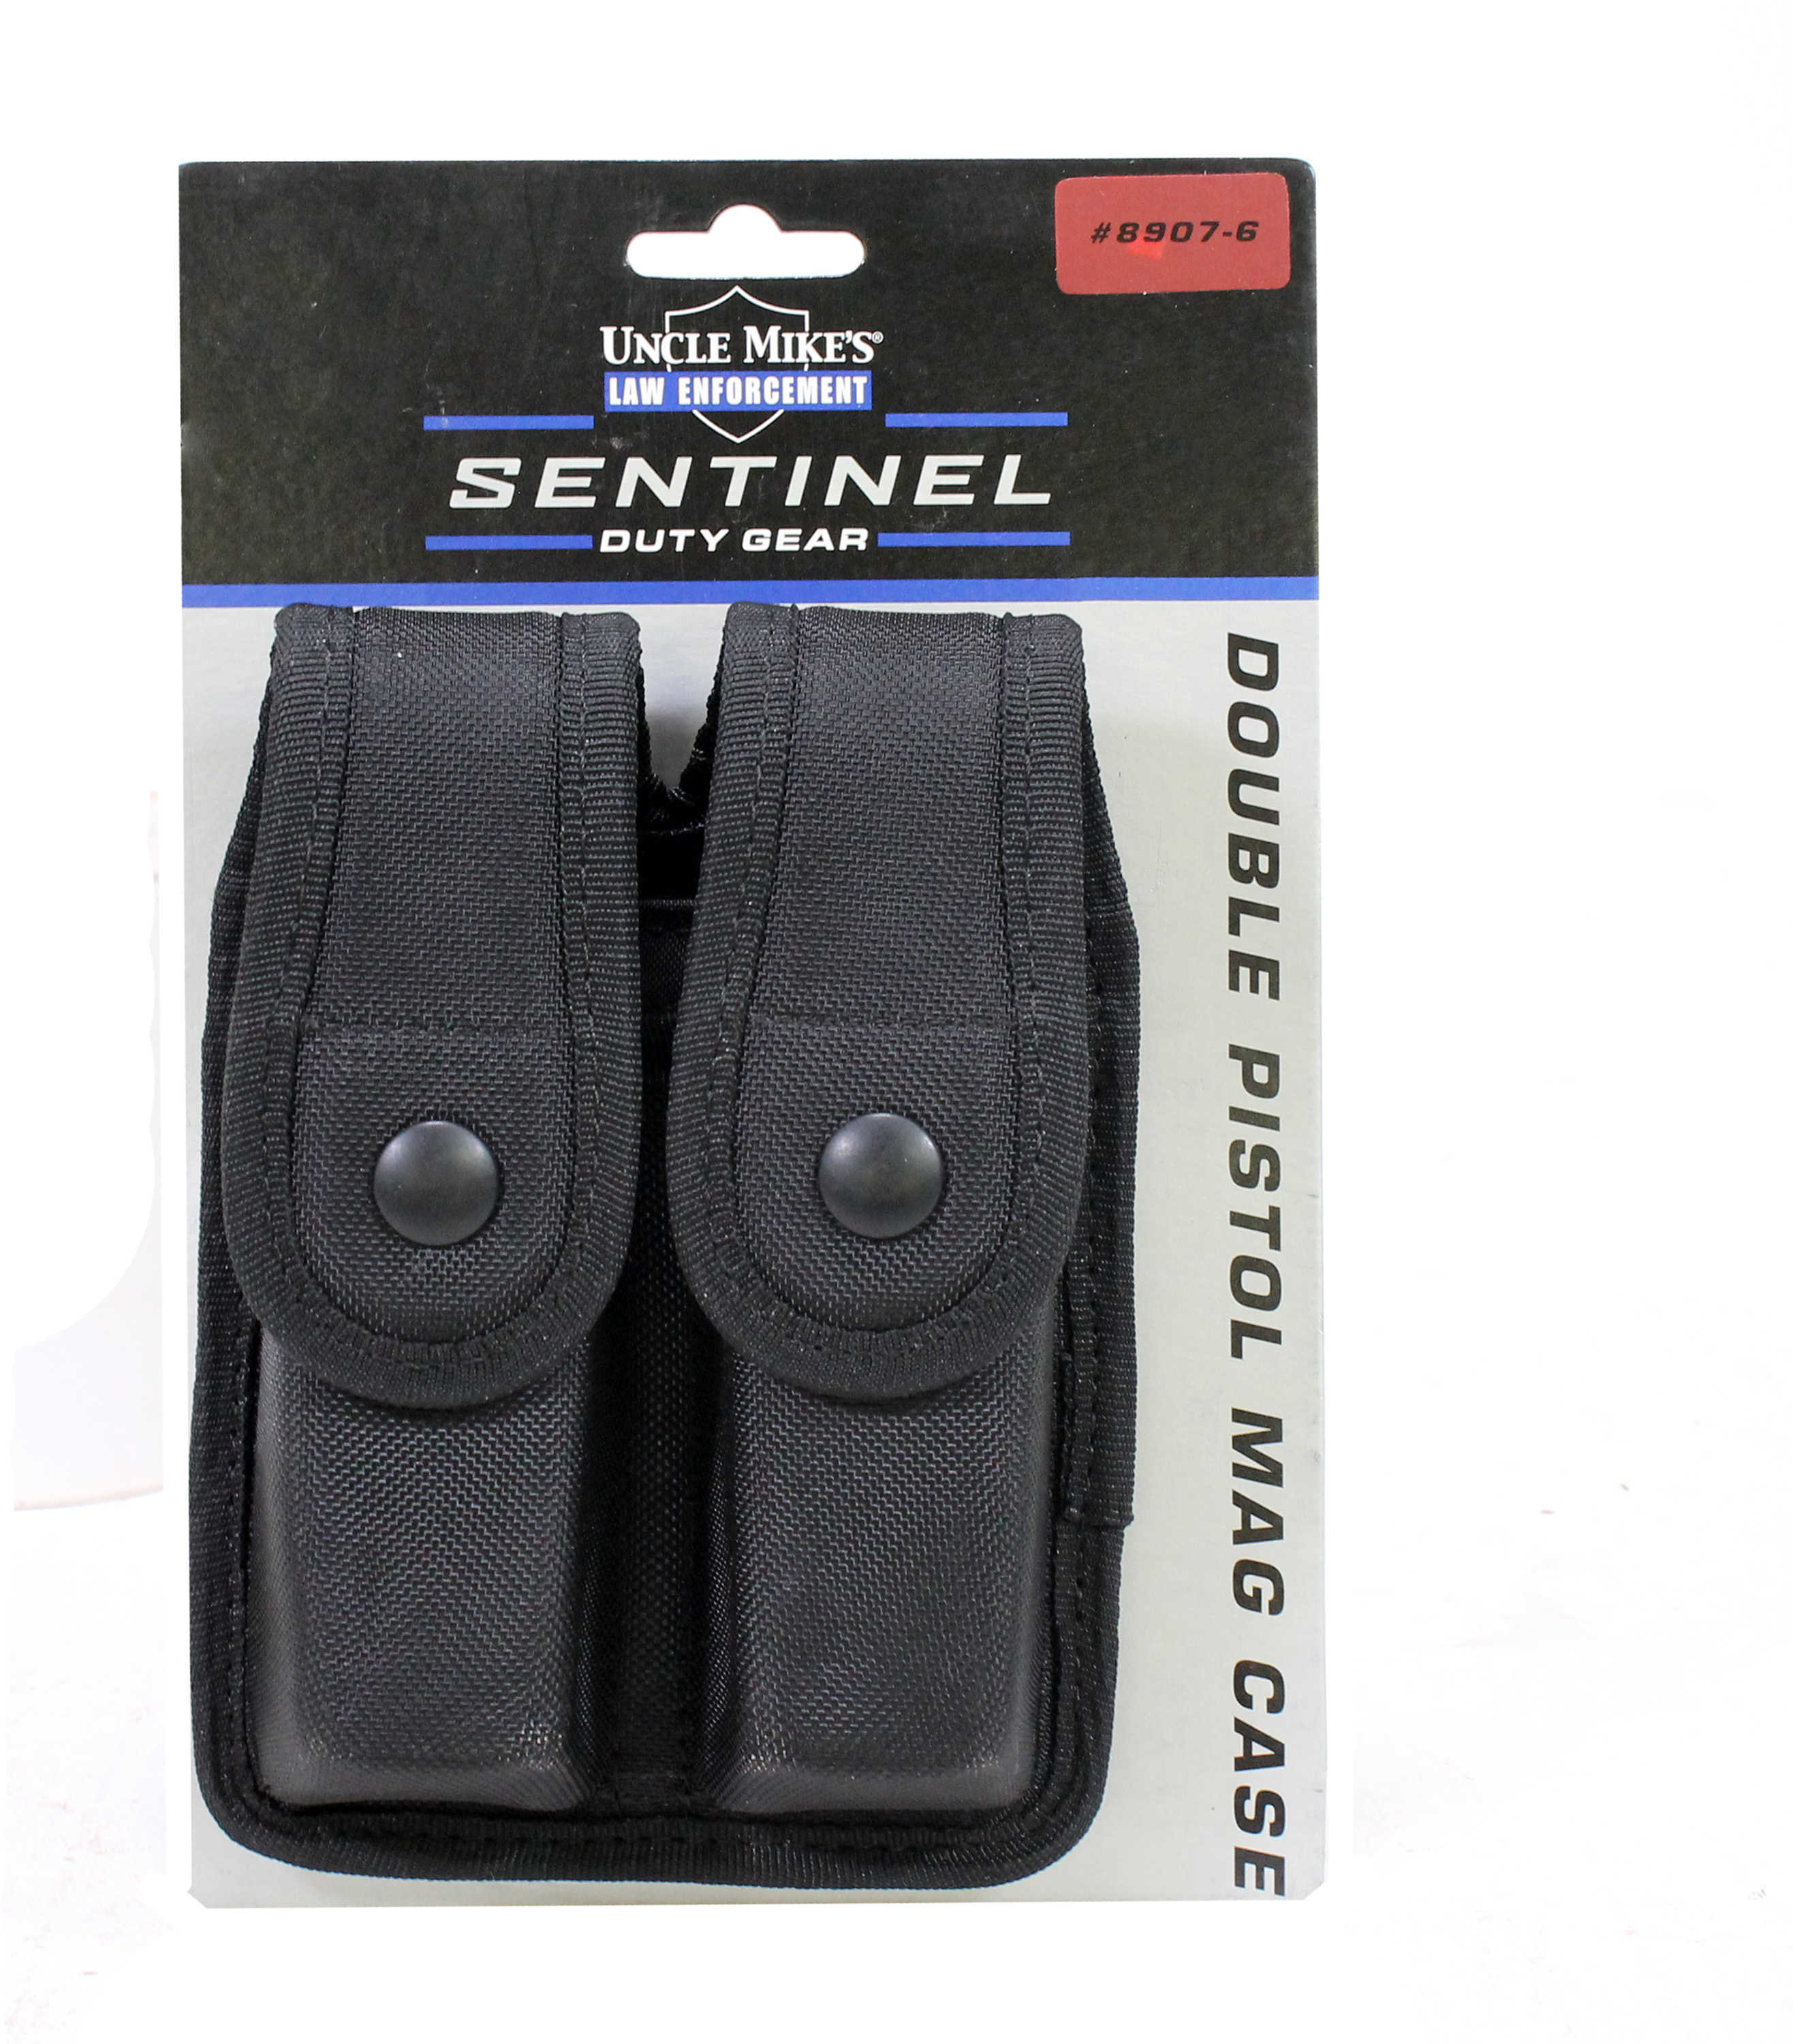 Uncle Mikes Sentinel Duty Gear Double Mag Case, for Glock 21, Black Md: 89076